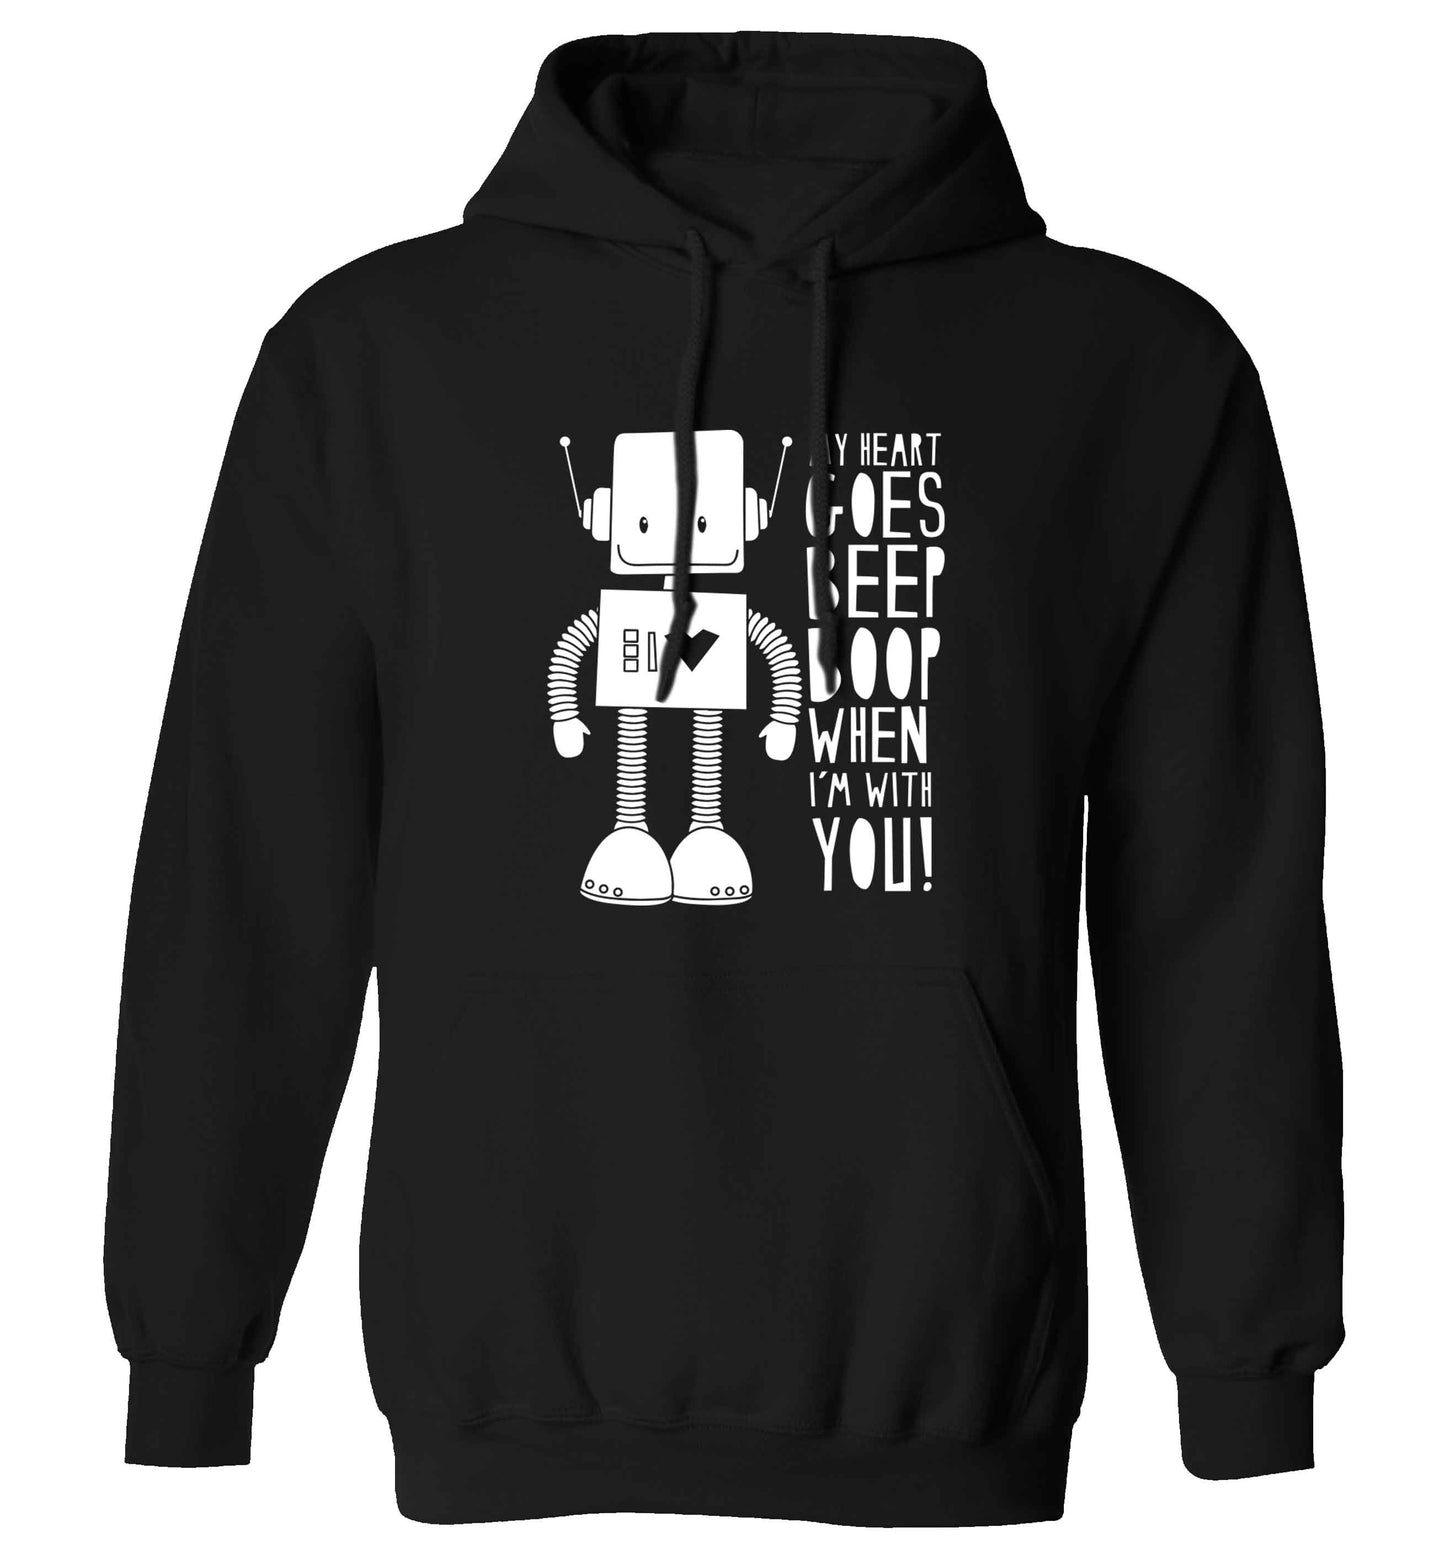 My heart goes beep boop when I'm with you adults unisex black hoodie 2XL